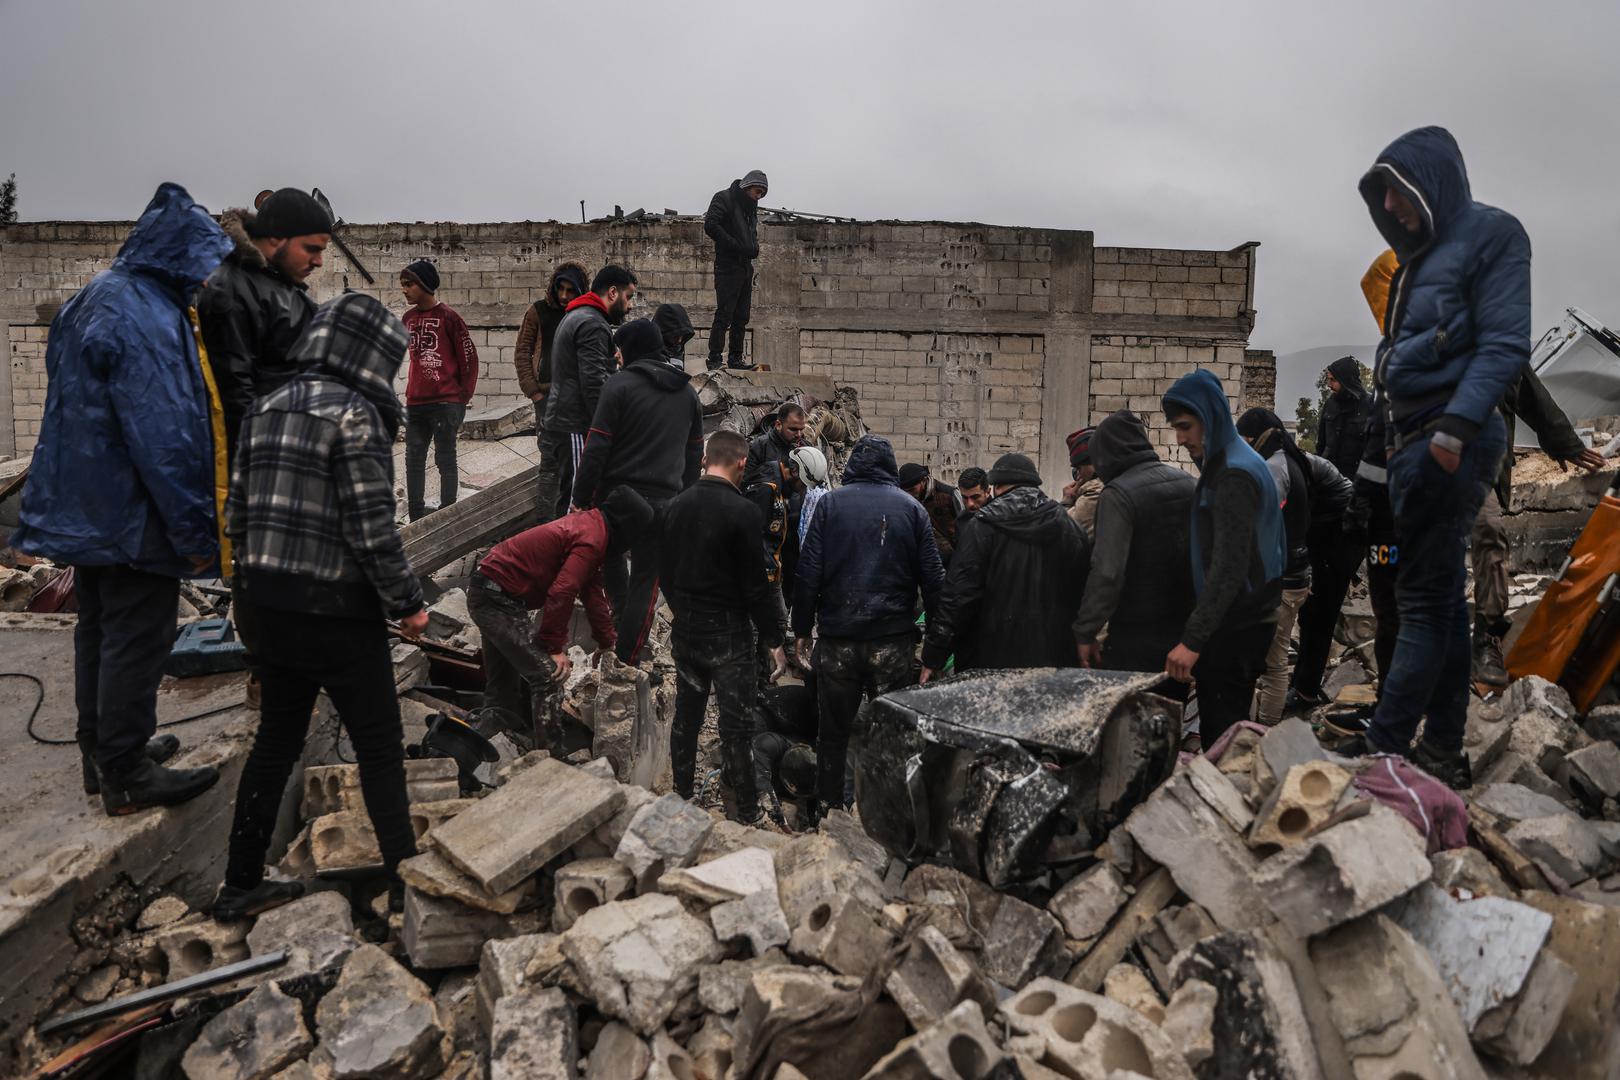 06 February 2023, Syria, Idlib: Syrian civilians and members of the White Helmets work to save people trapped beneath a destroyed building following a magnitude 7.8 earthquake that hit Syria. Photo: Anas Alkharboutli/dpa Photo: Anas Alkharboutli/DPA